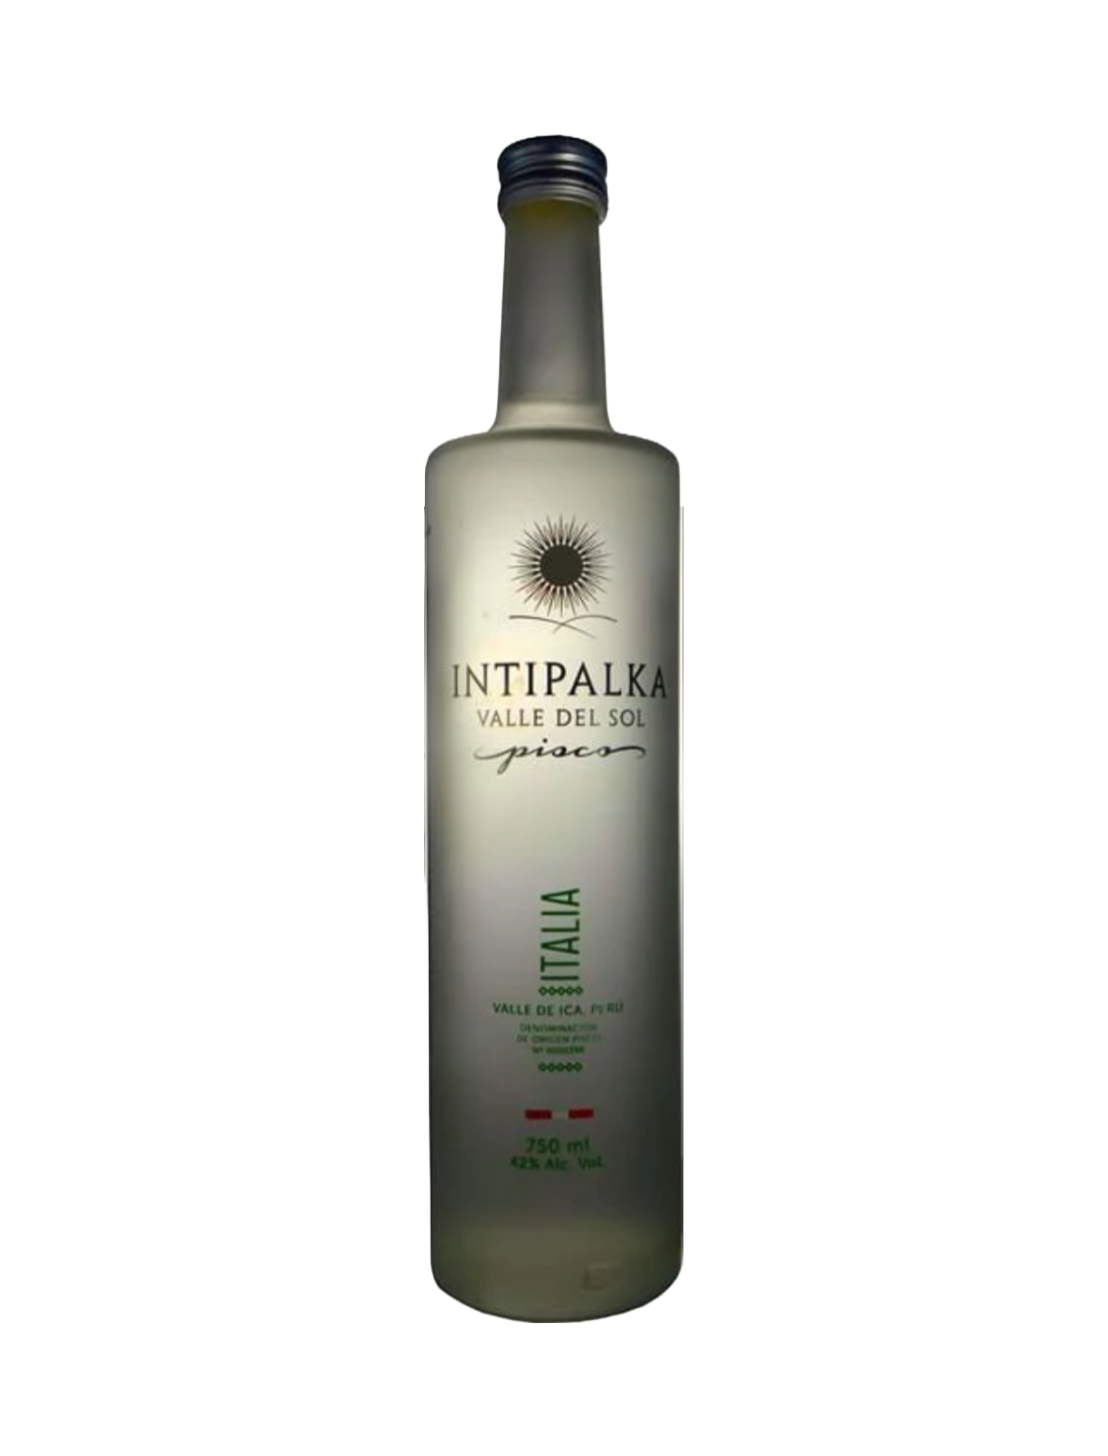 Elegant Intipalka Pisco Puro bottle, signifying its five-time distilled smoothness and six-month oak aging.